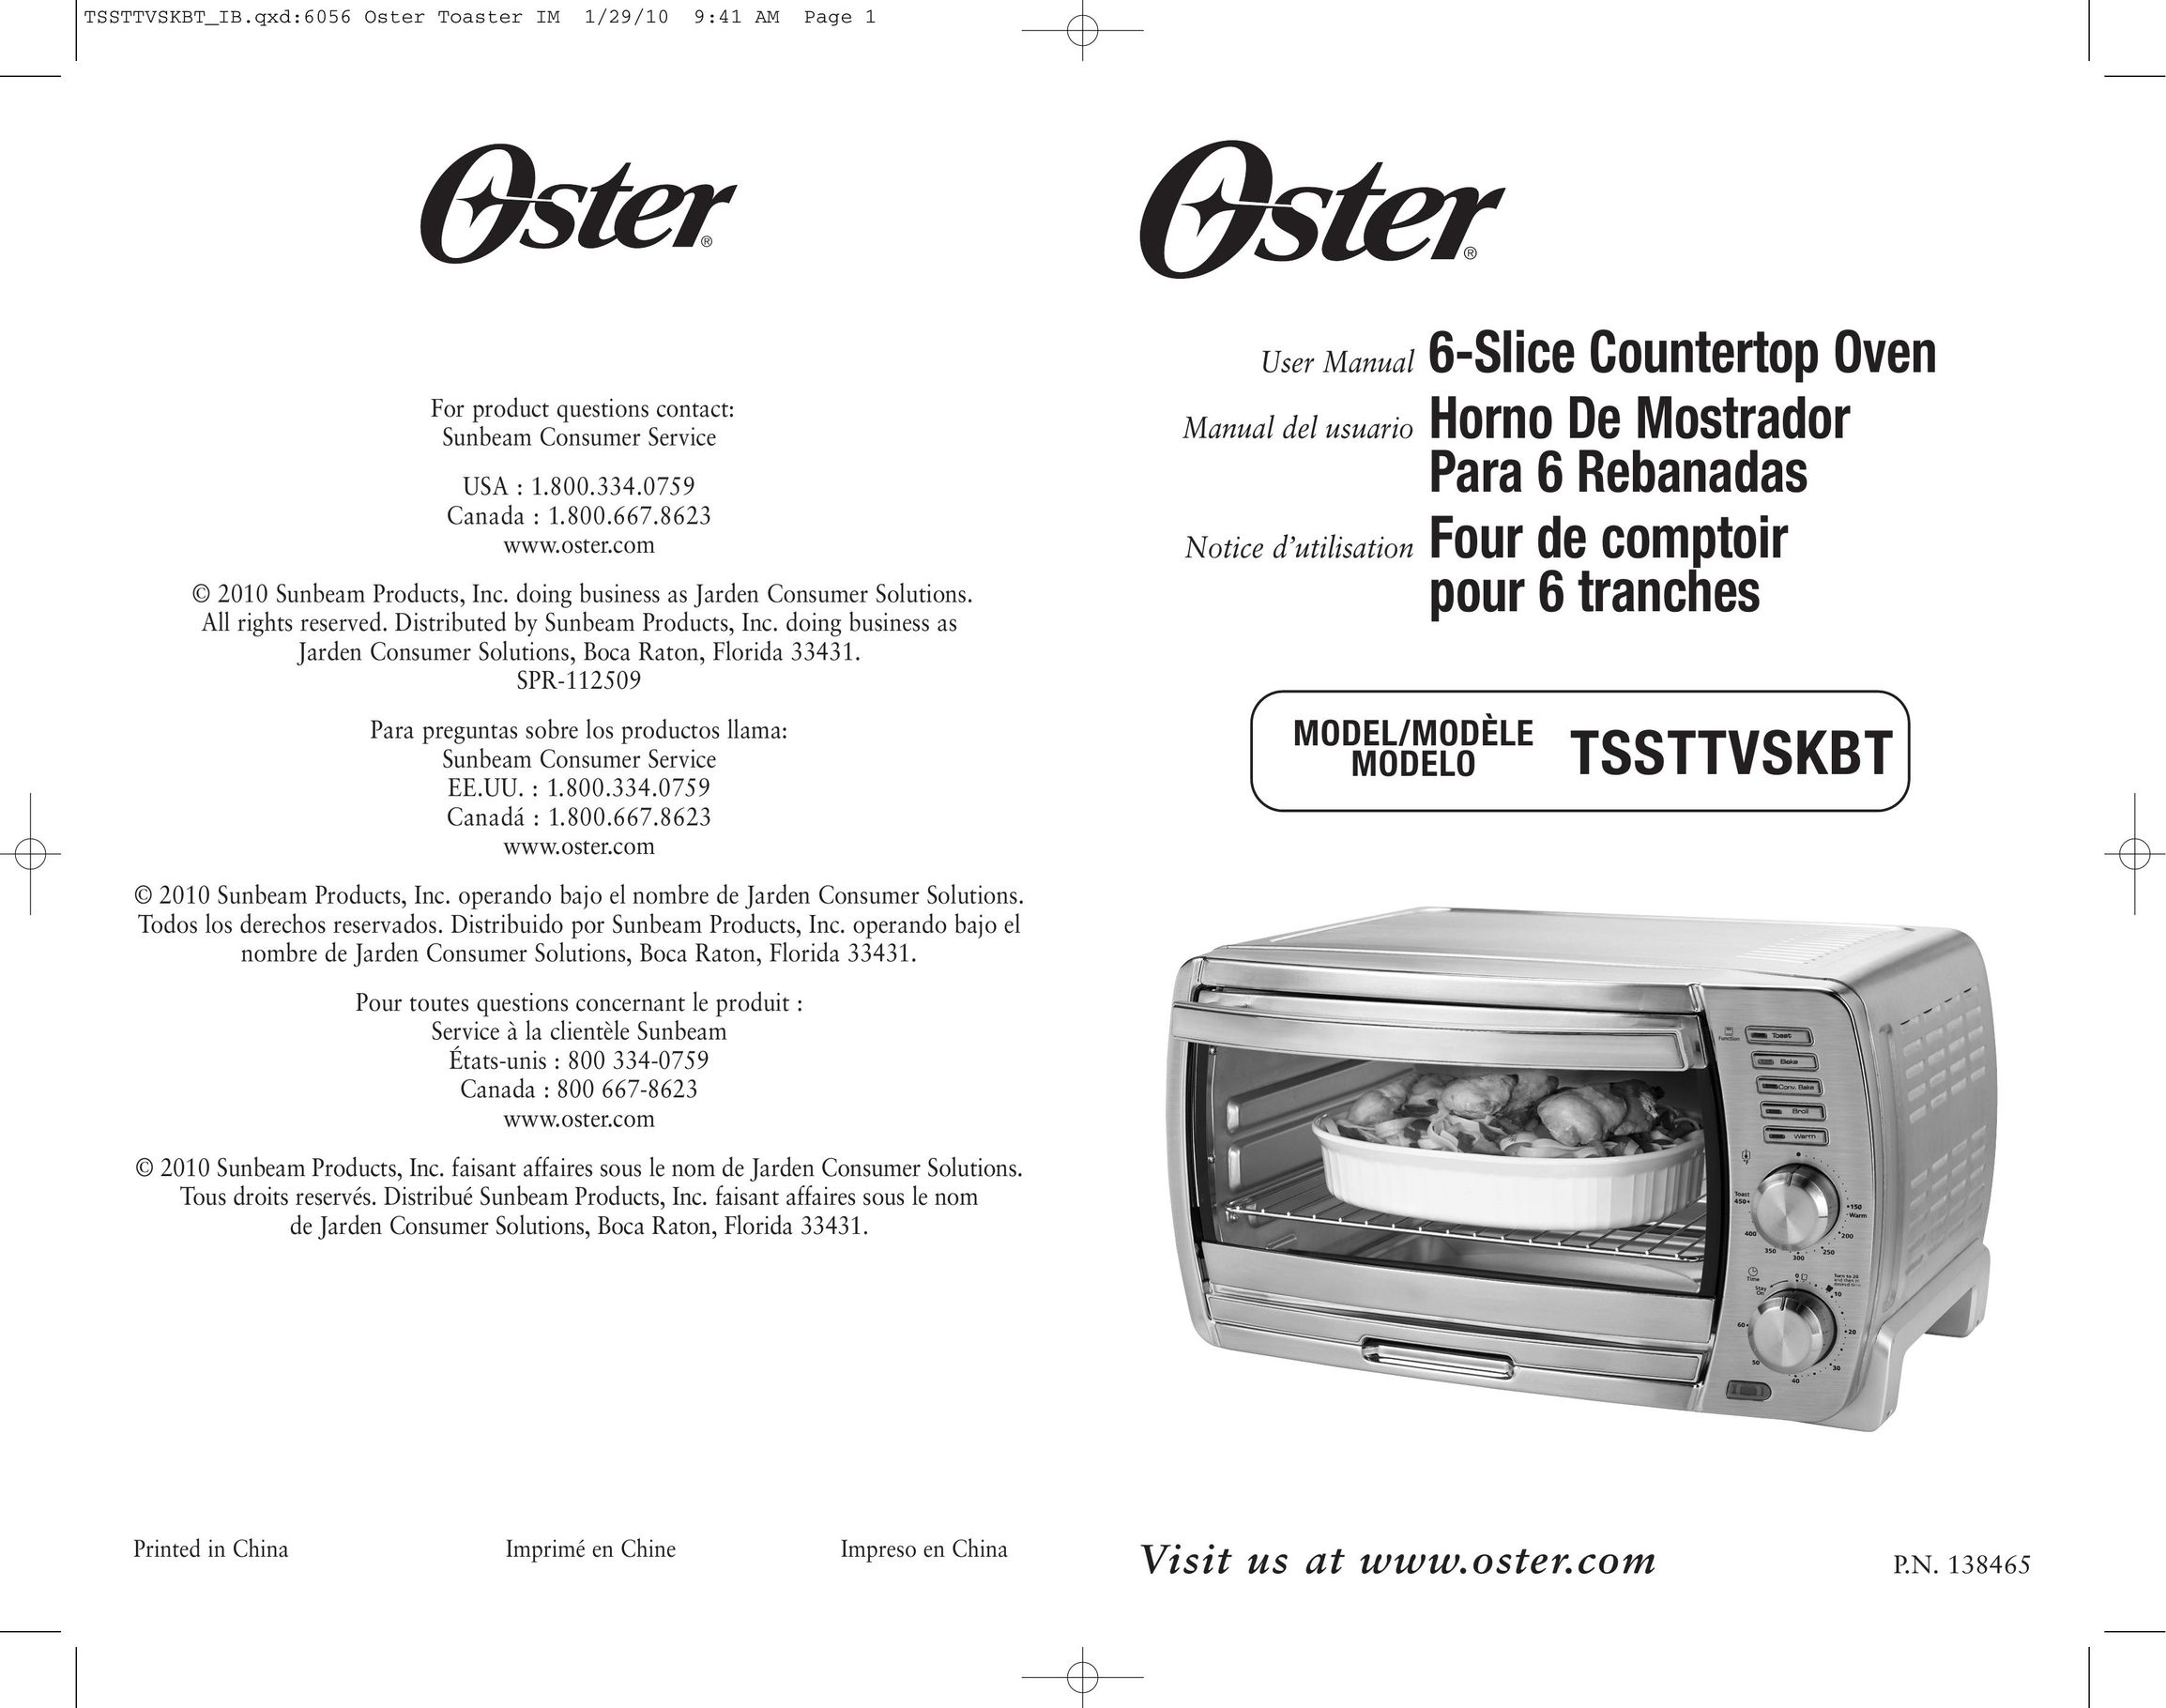 Oster SPR-112509 Oven User Manual